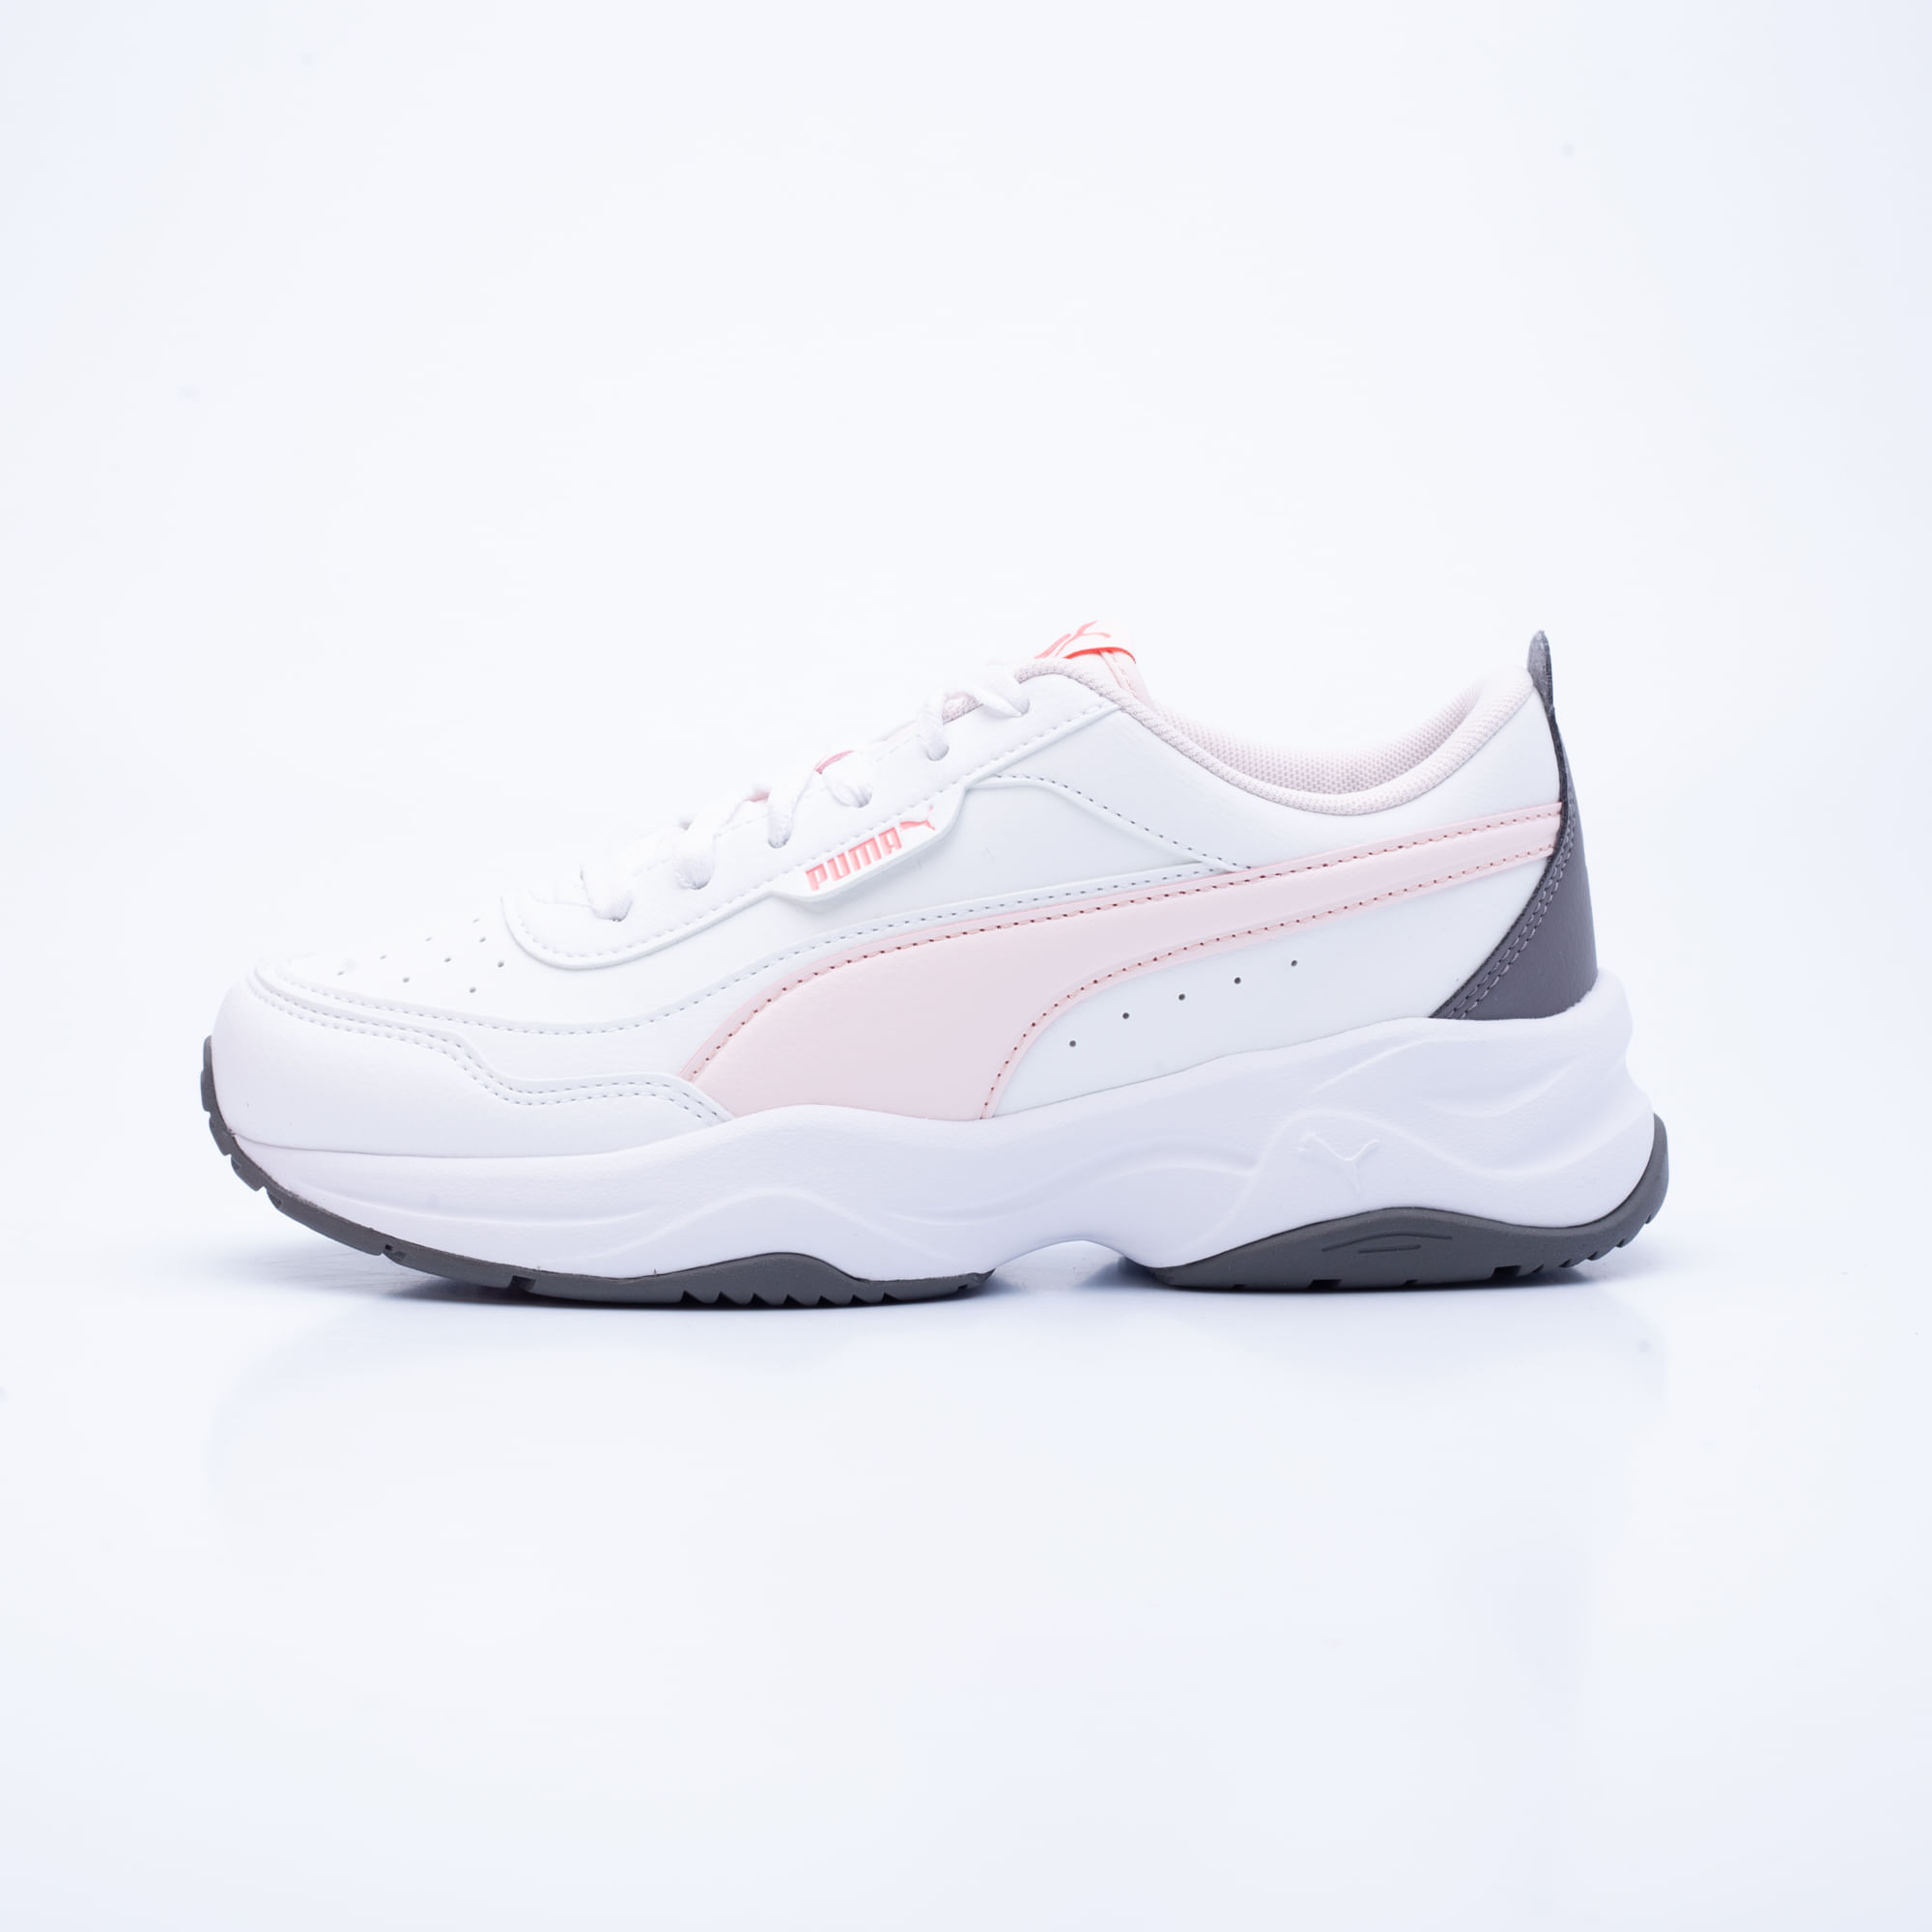 tenis puma mujer 2019 colombia